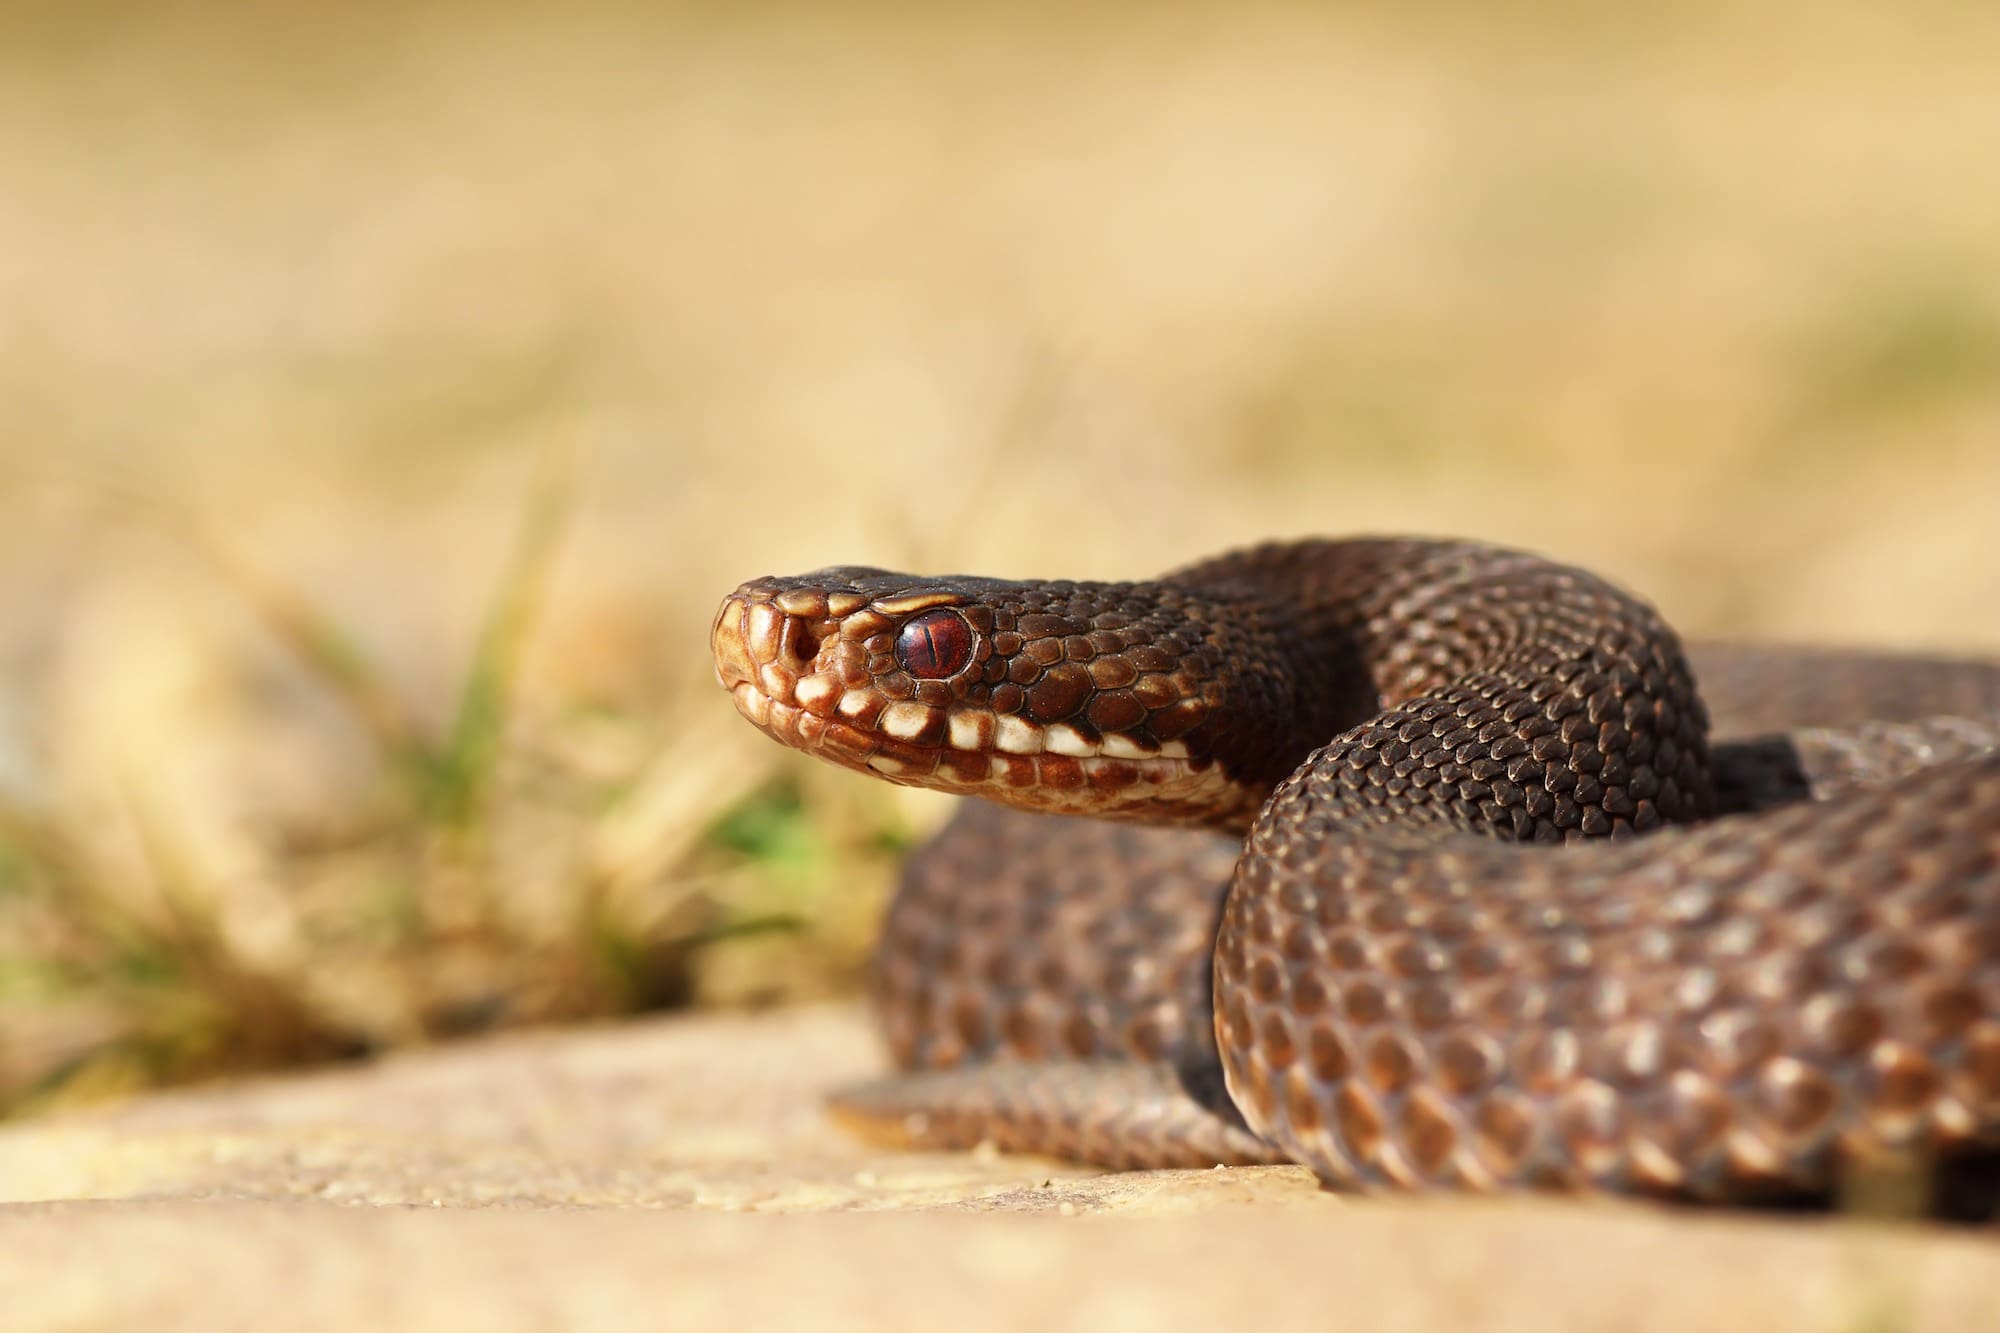 First aid for bites and stings: Snakes